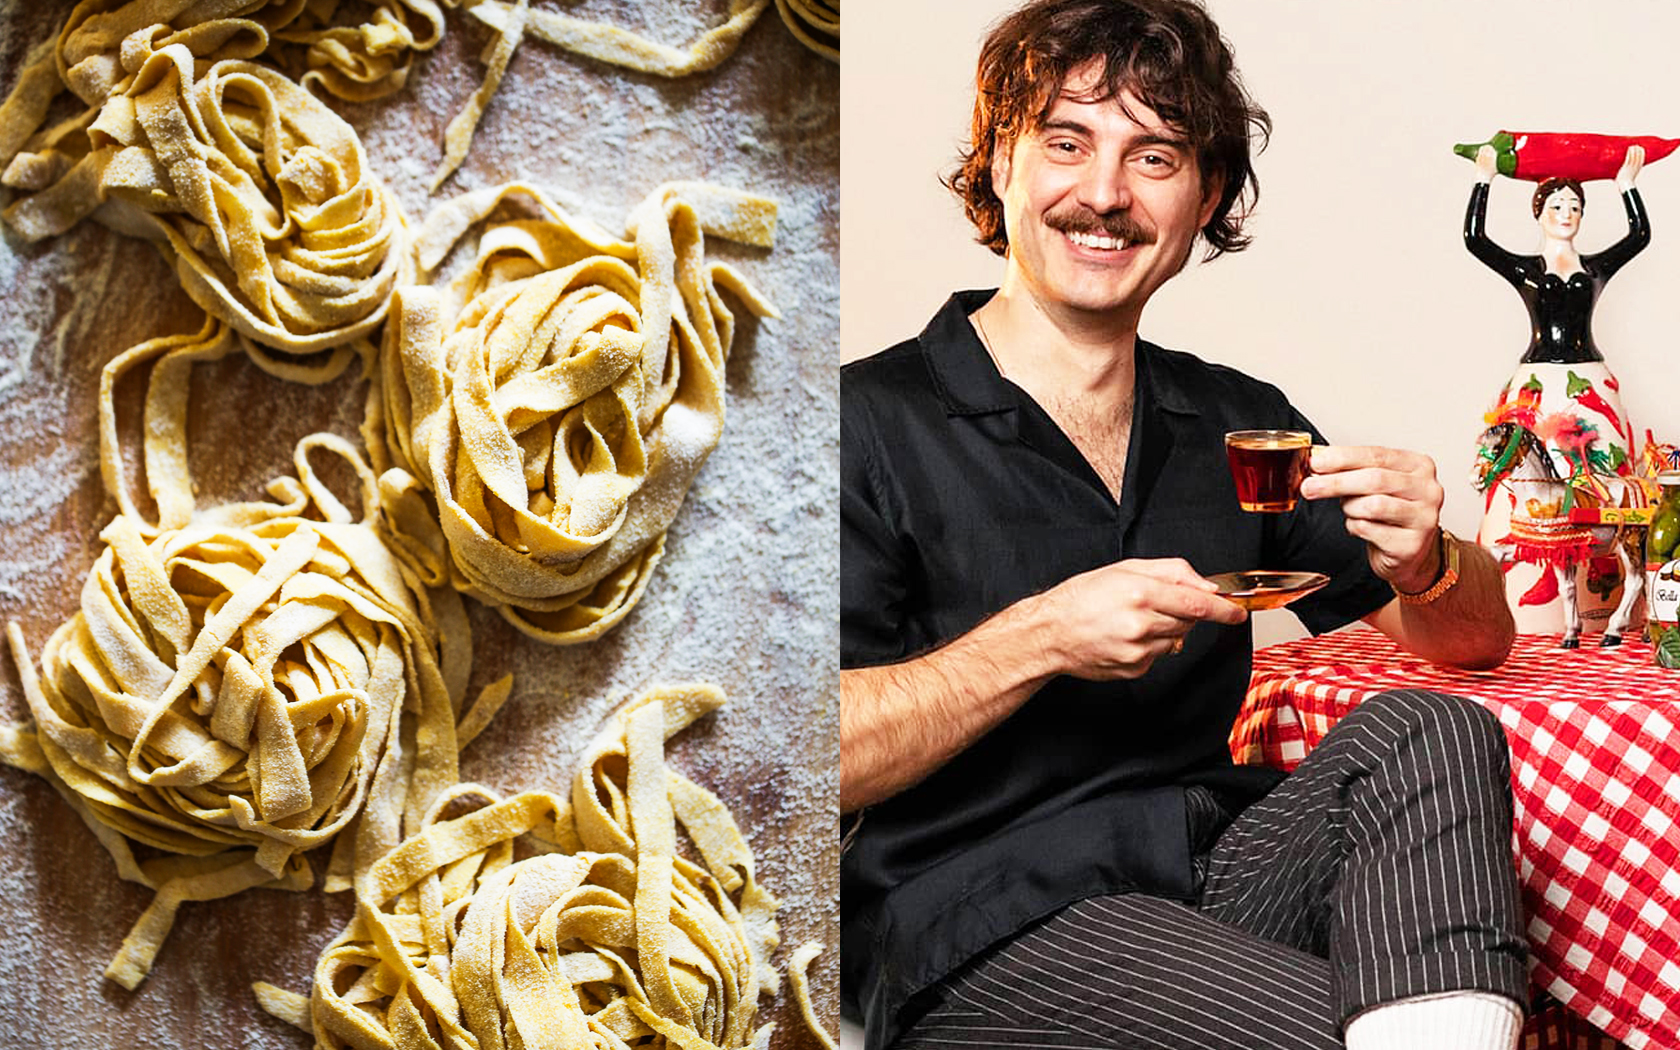 How To Make Pasta: Learn With The Very Aussie 'Pasta Hotline' YouTube